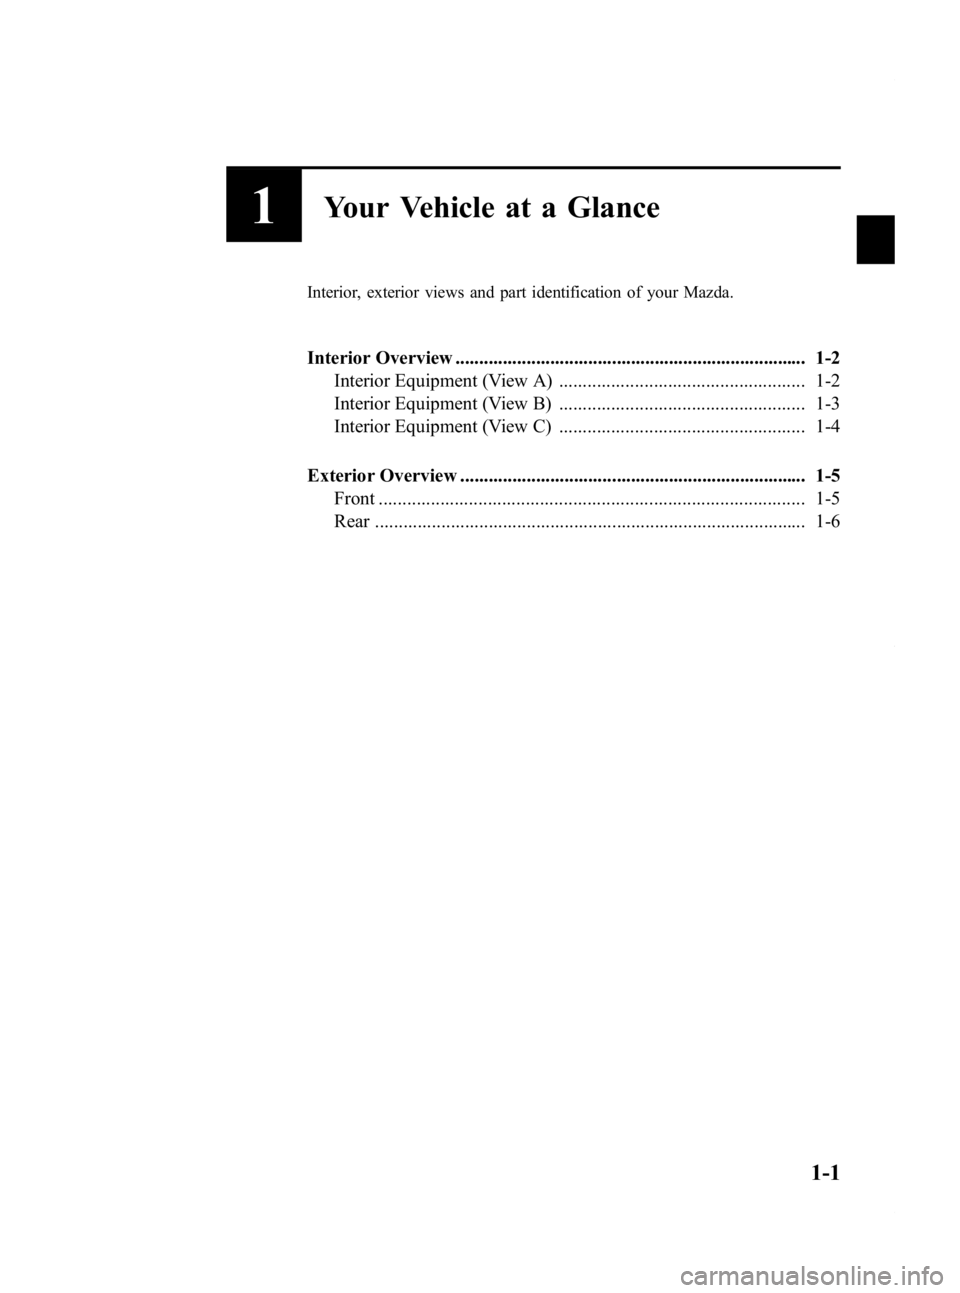 MAZDA MODEL 2 2012  Owners Manual Black plate (7,1)
1Your Vehicle at a Glance
Interior, exterior views and part identification of your Mazda.
Interior Overview ..........................................................................